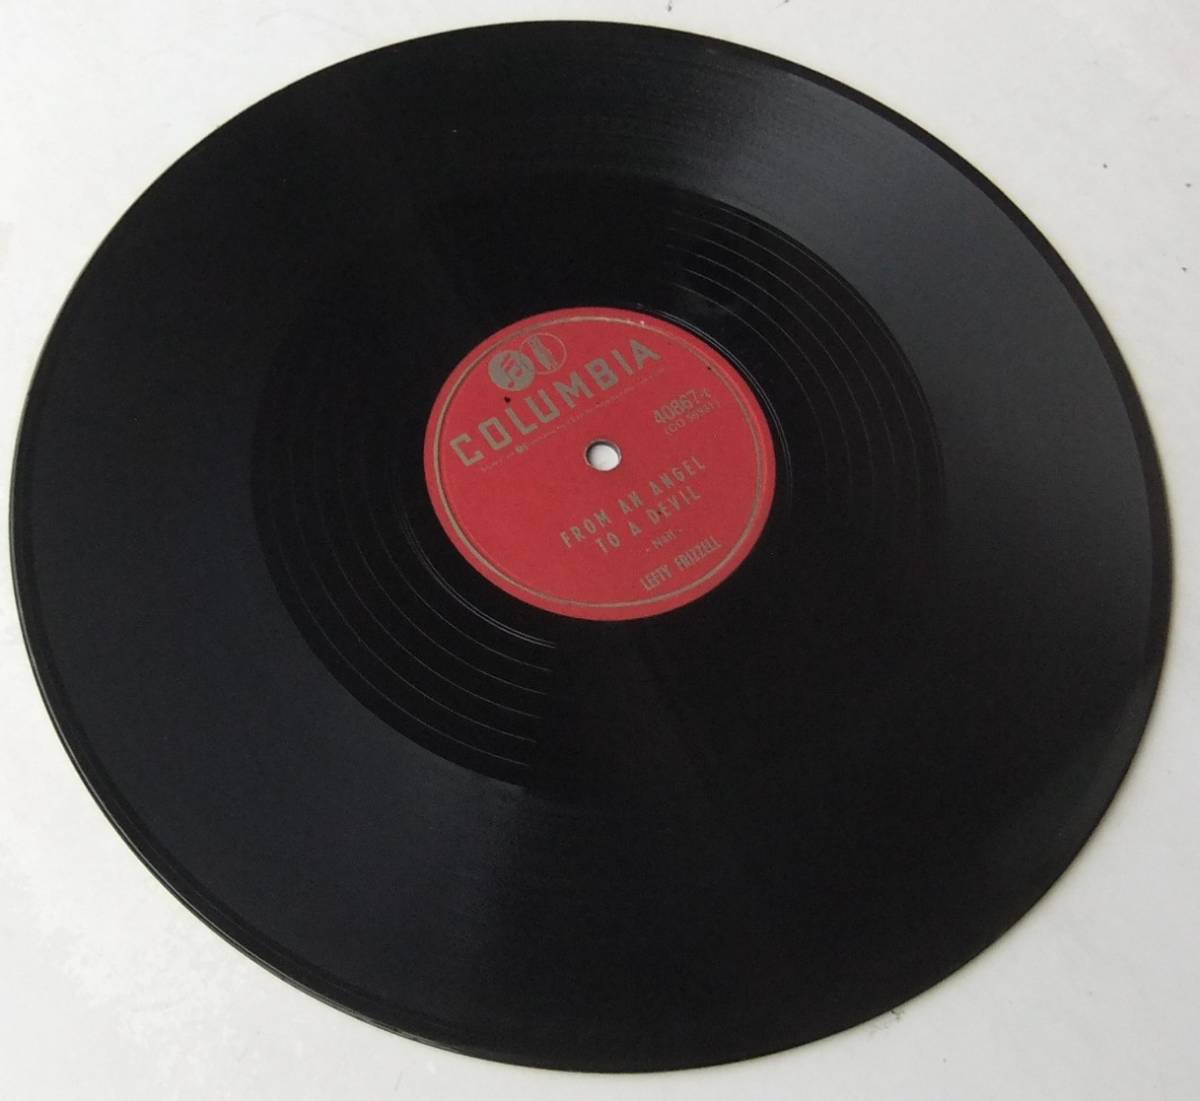 ◆ LEFTY FRIZZELL ◆ Now That You Are Gone / From An Angel To A Devil ◆ Columbia 40867 (78rpm SP) ◆_画像5